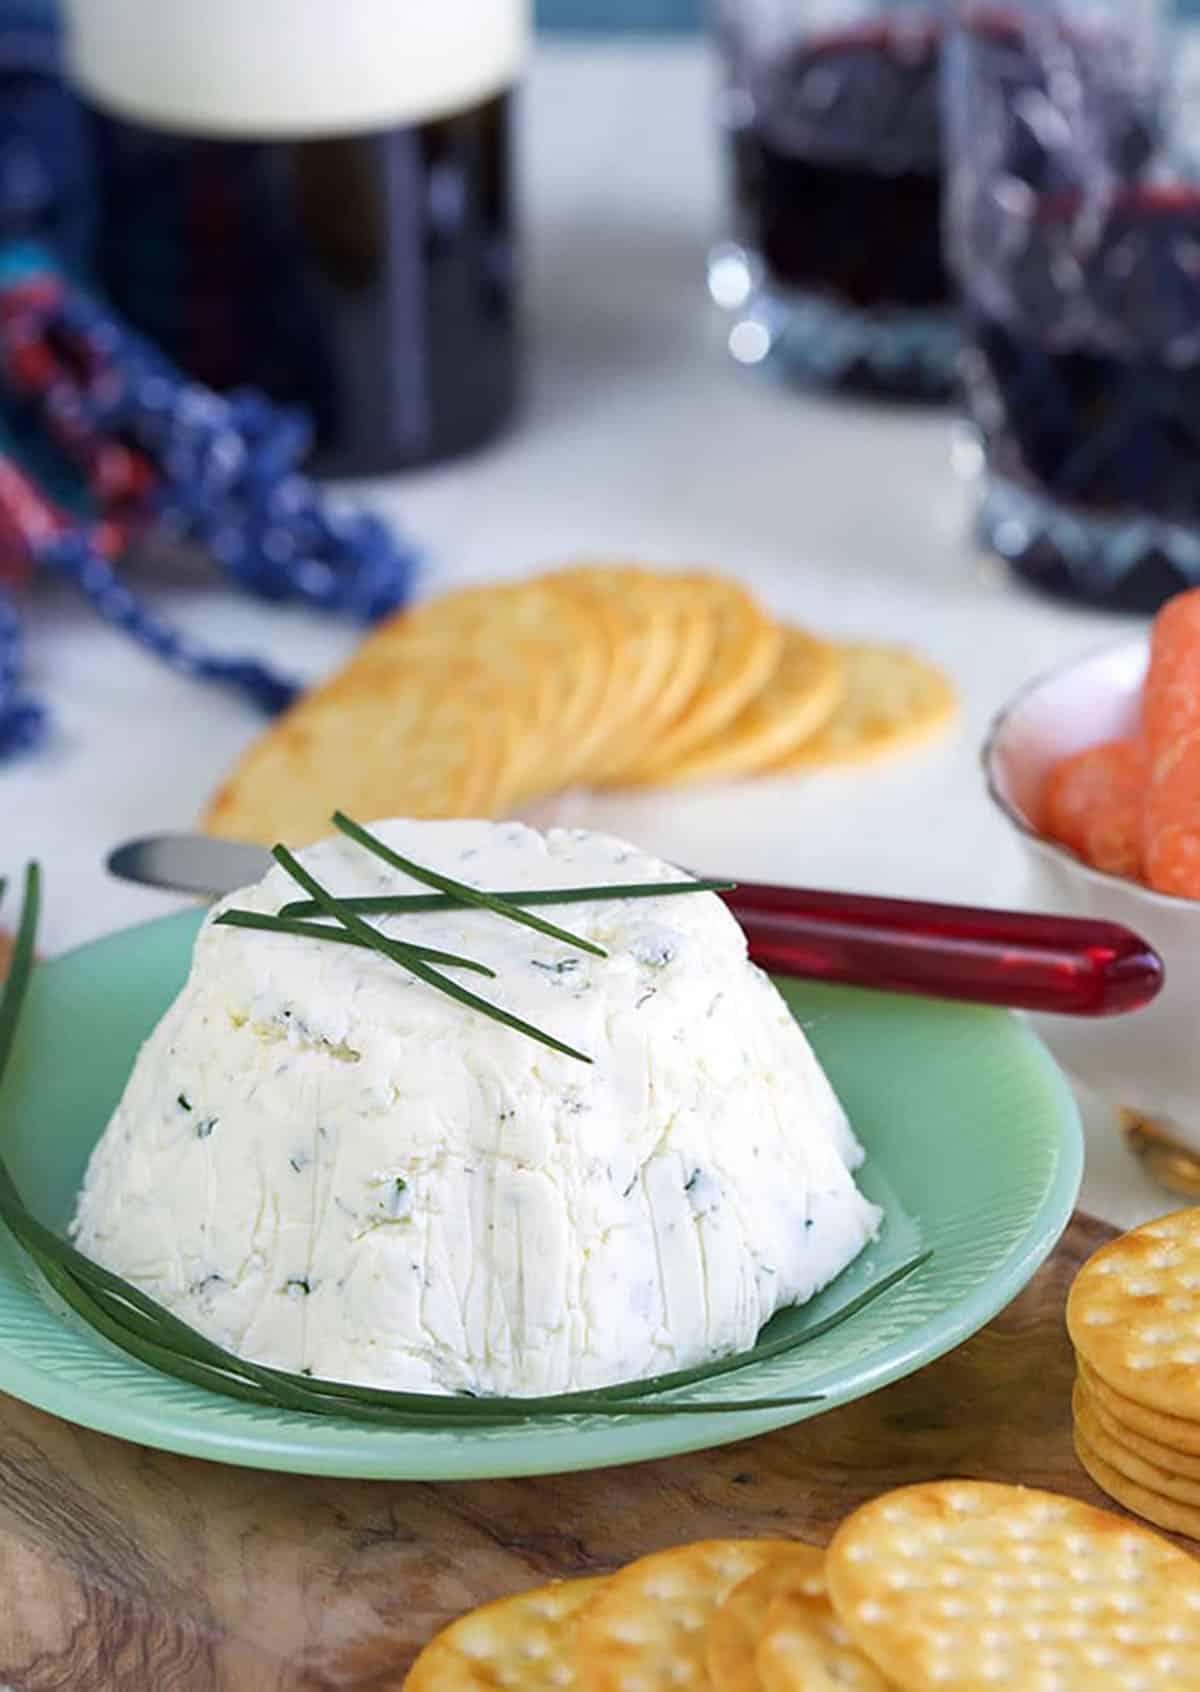 Boursin cheese is garnished with fresh chives.